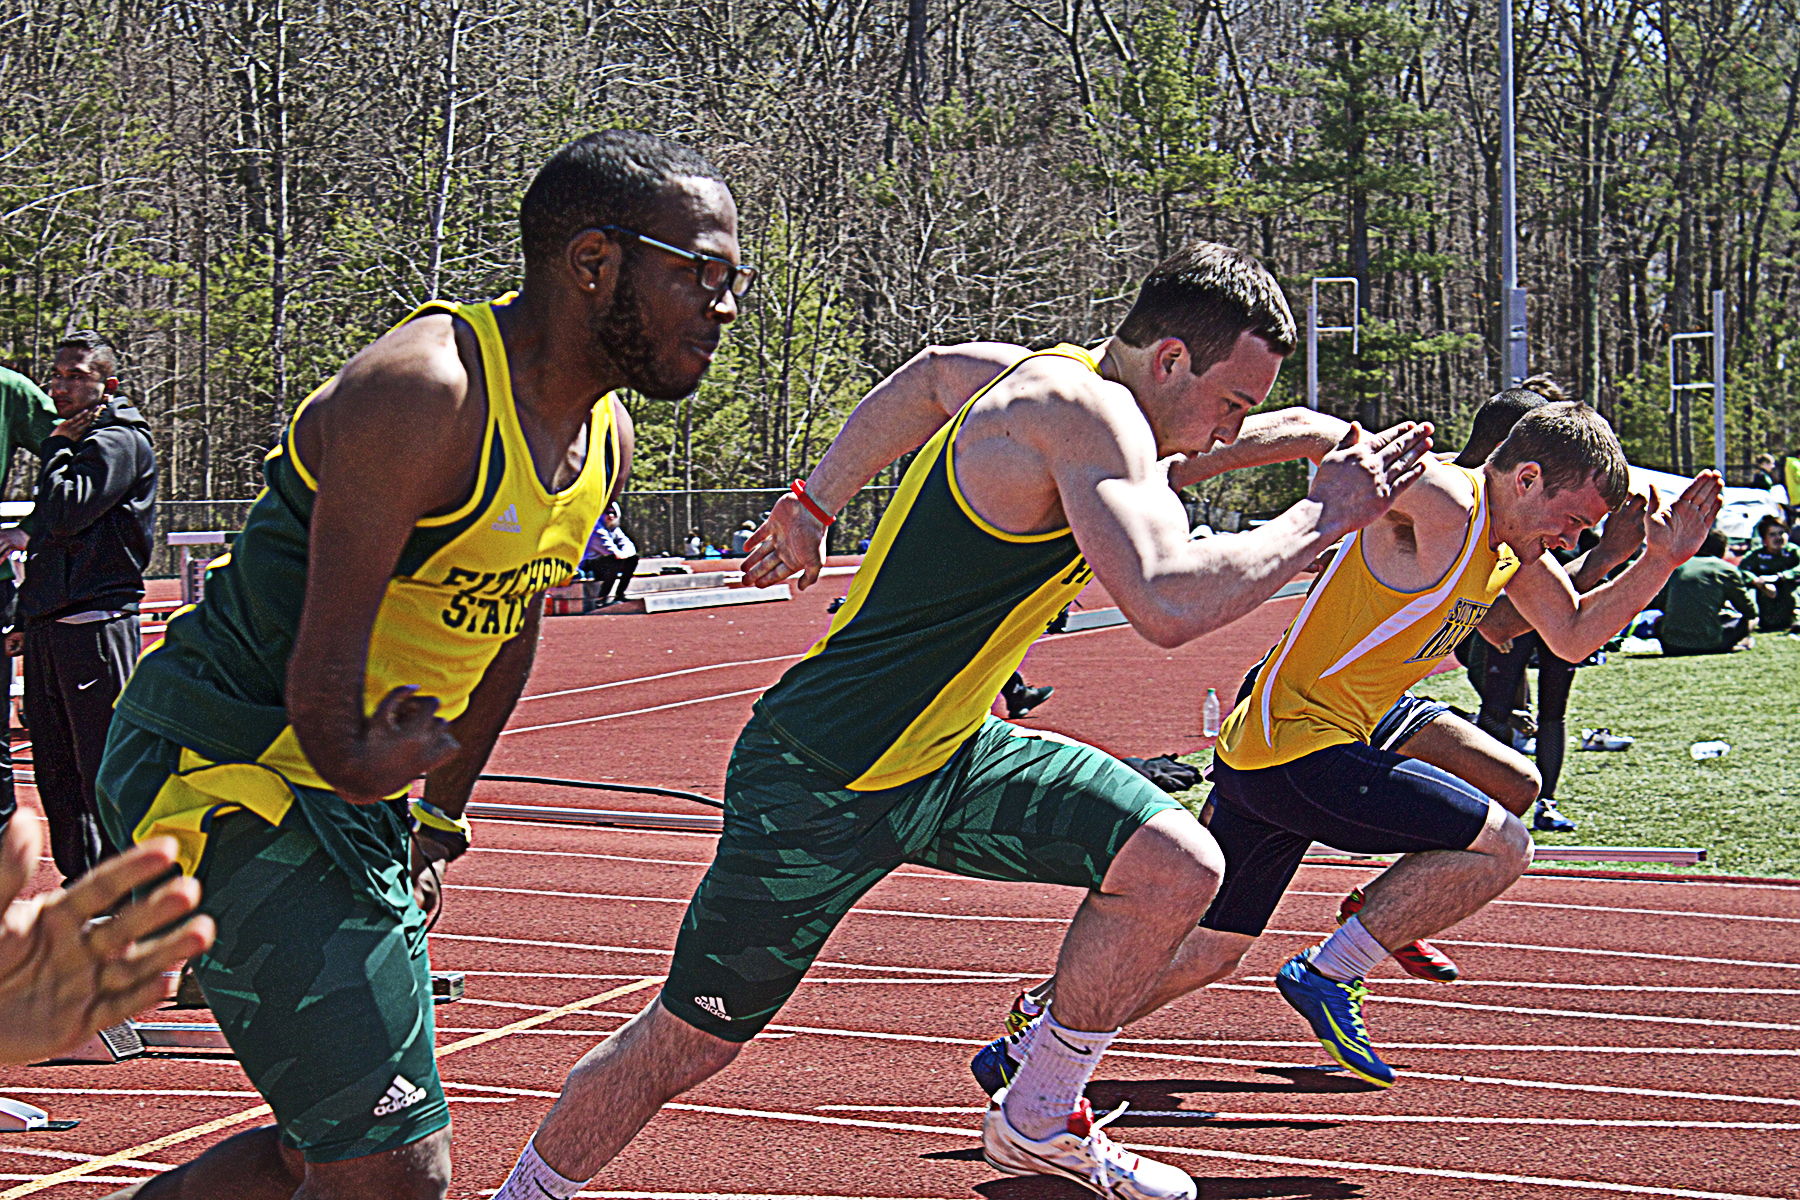 Fitchburg State Hosts Eric Loeschner Invite